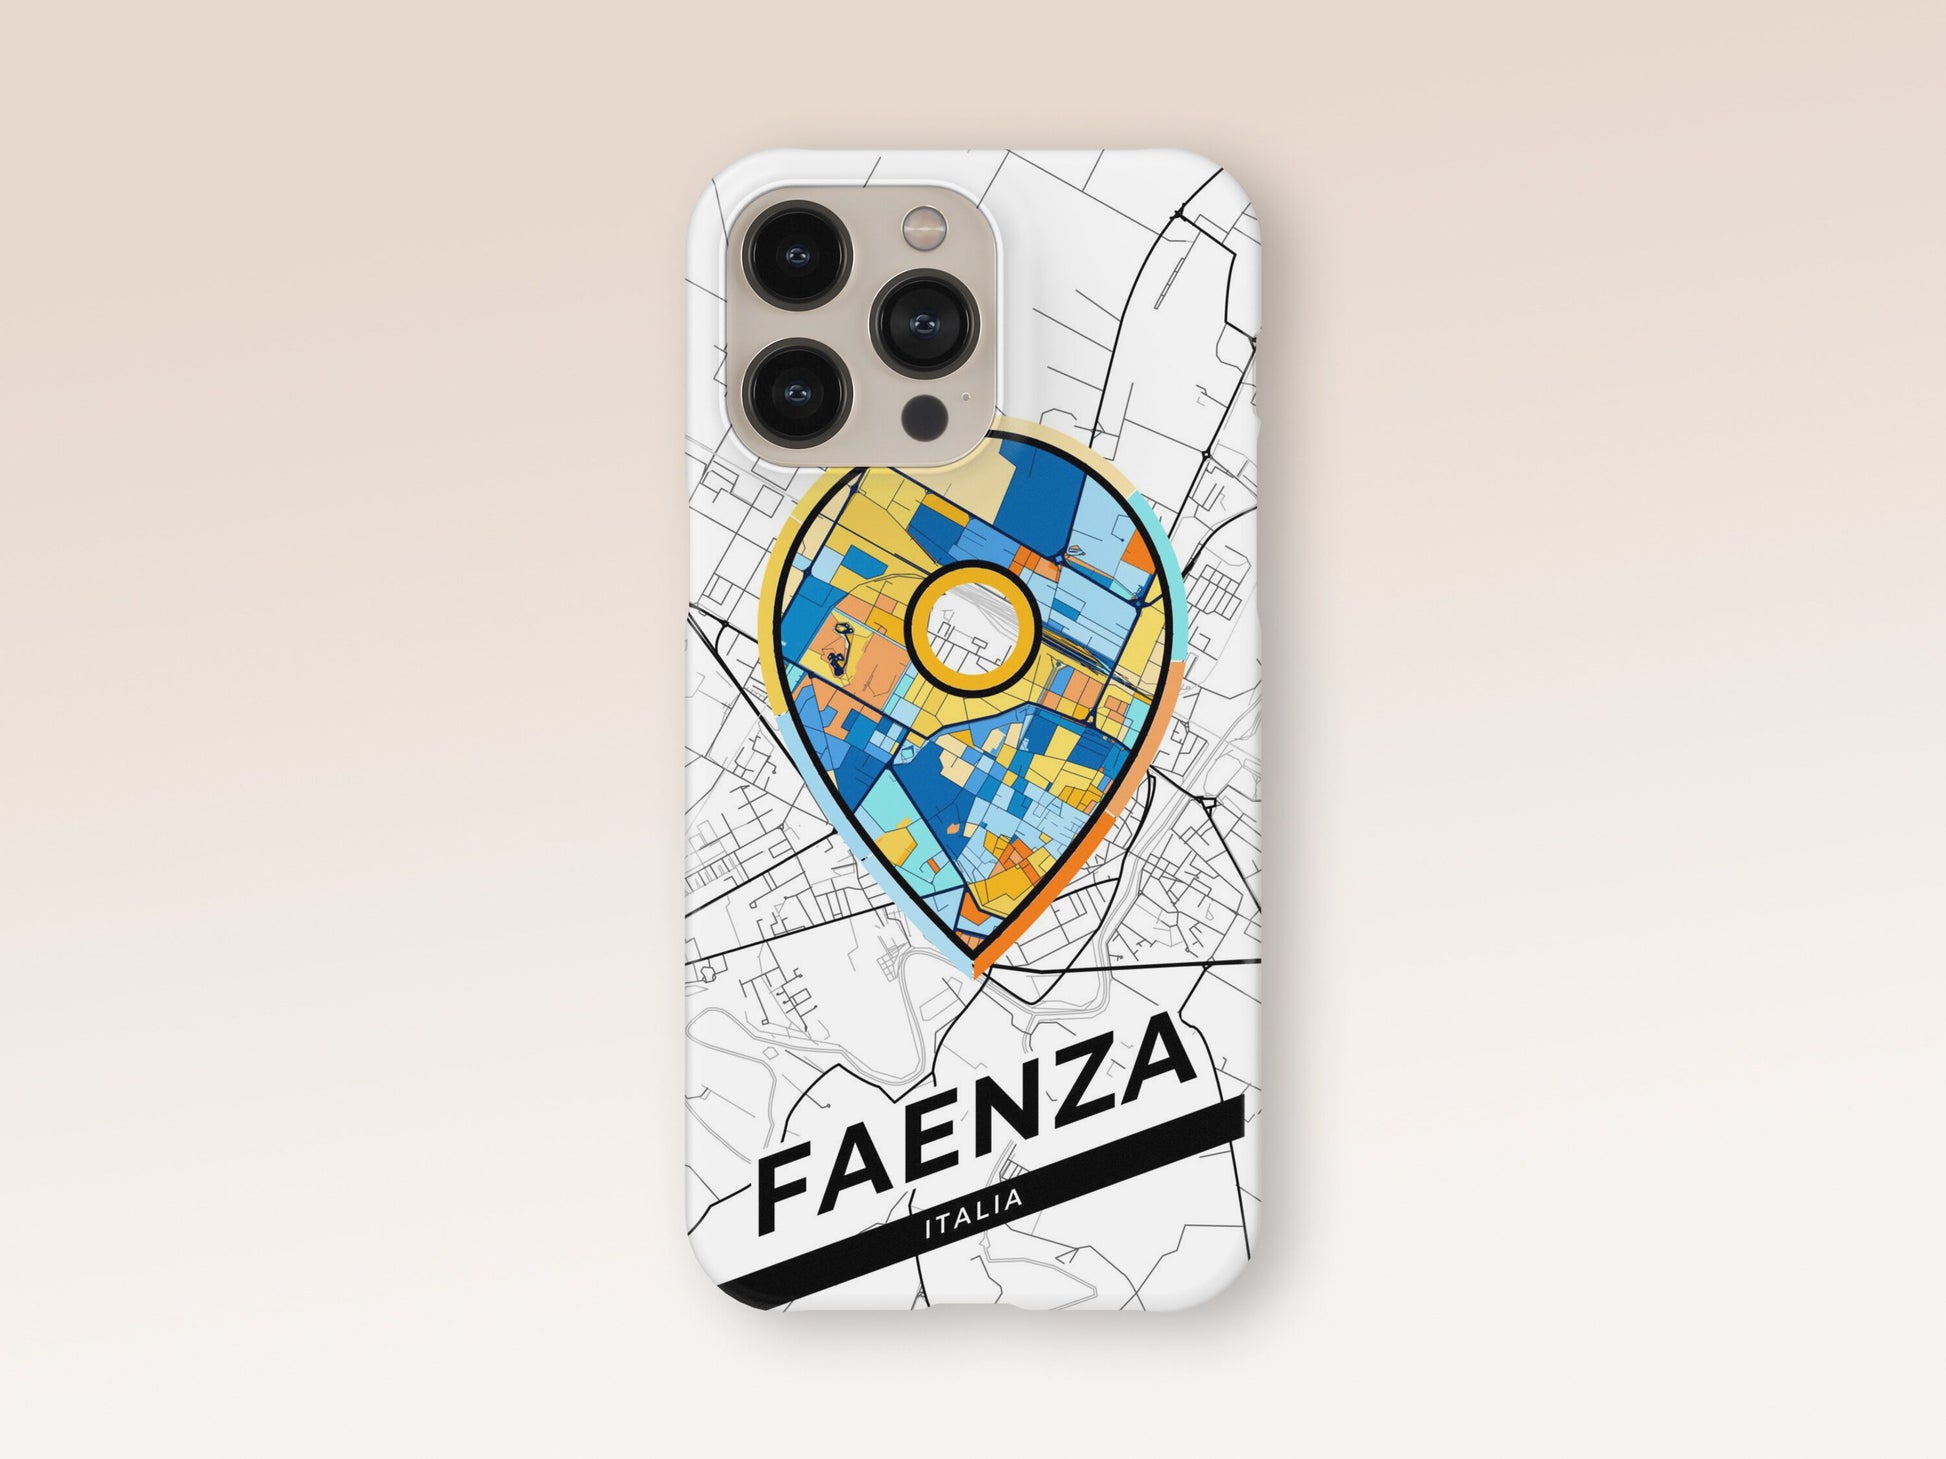 Faenza Italy slim phone case with colorful icon. Birthday, wedding or housewarming gift. Couple match cases. 1